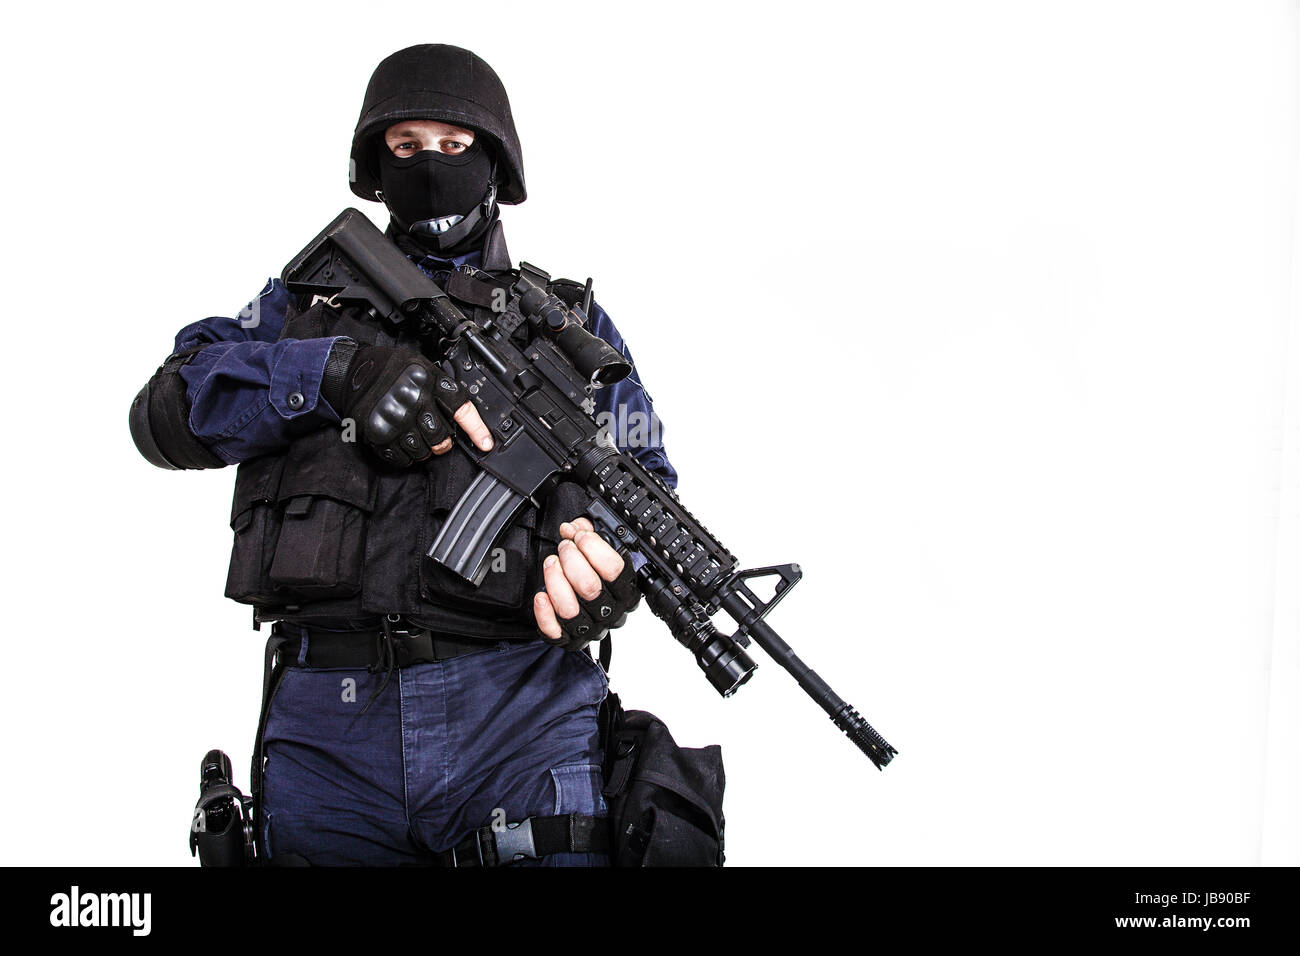 Special weapons and tactics (SWAT) team officer with his gun Stock Photo